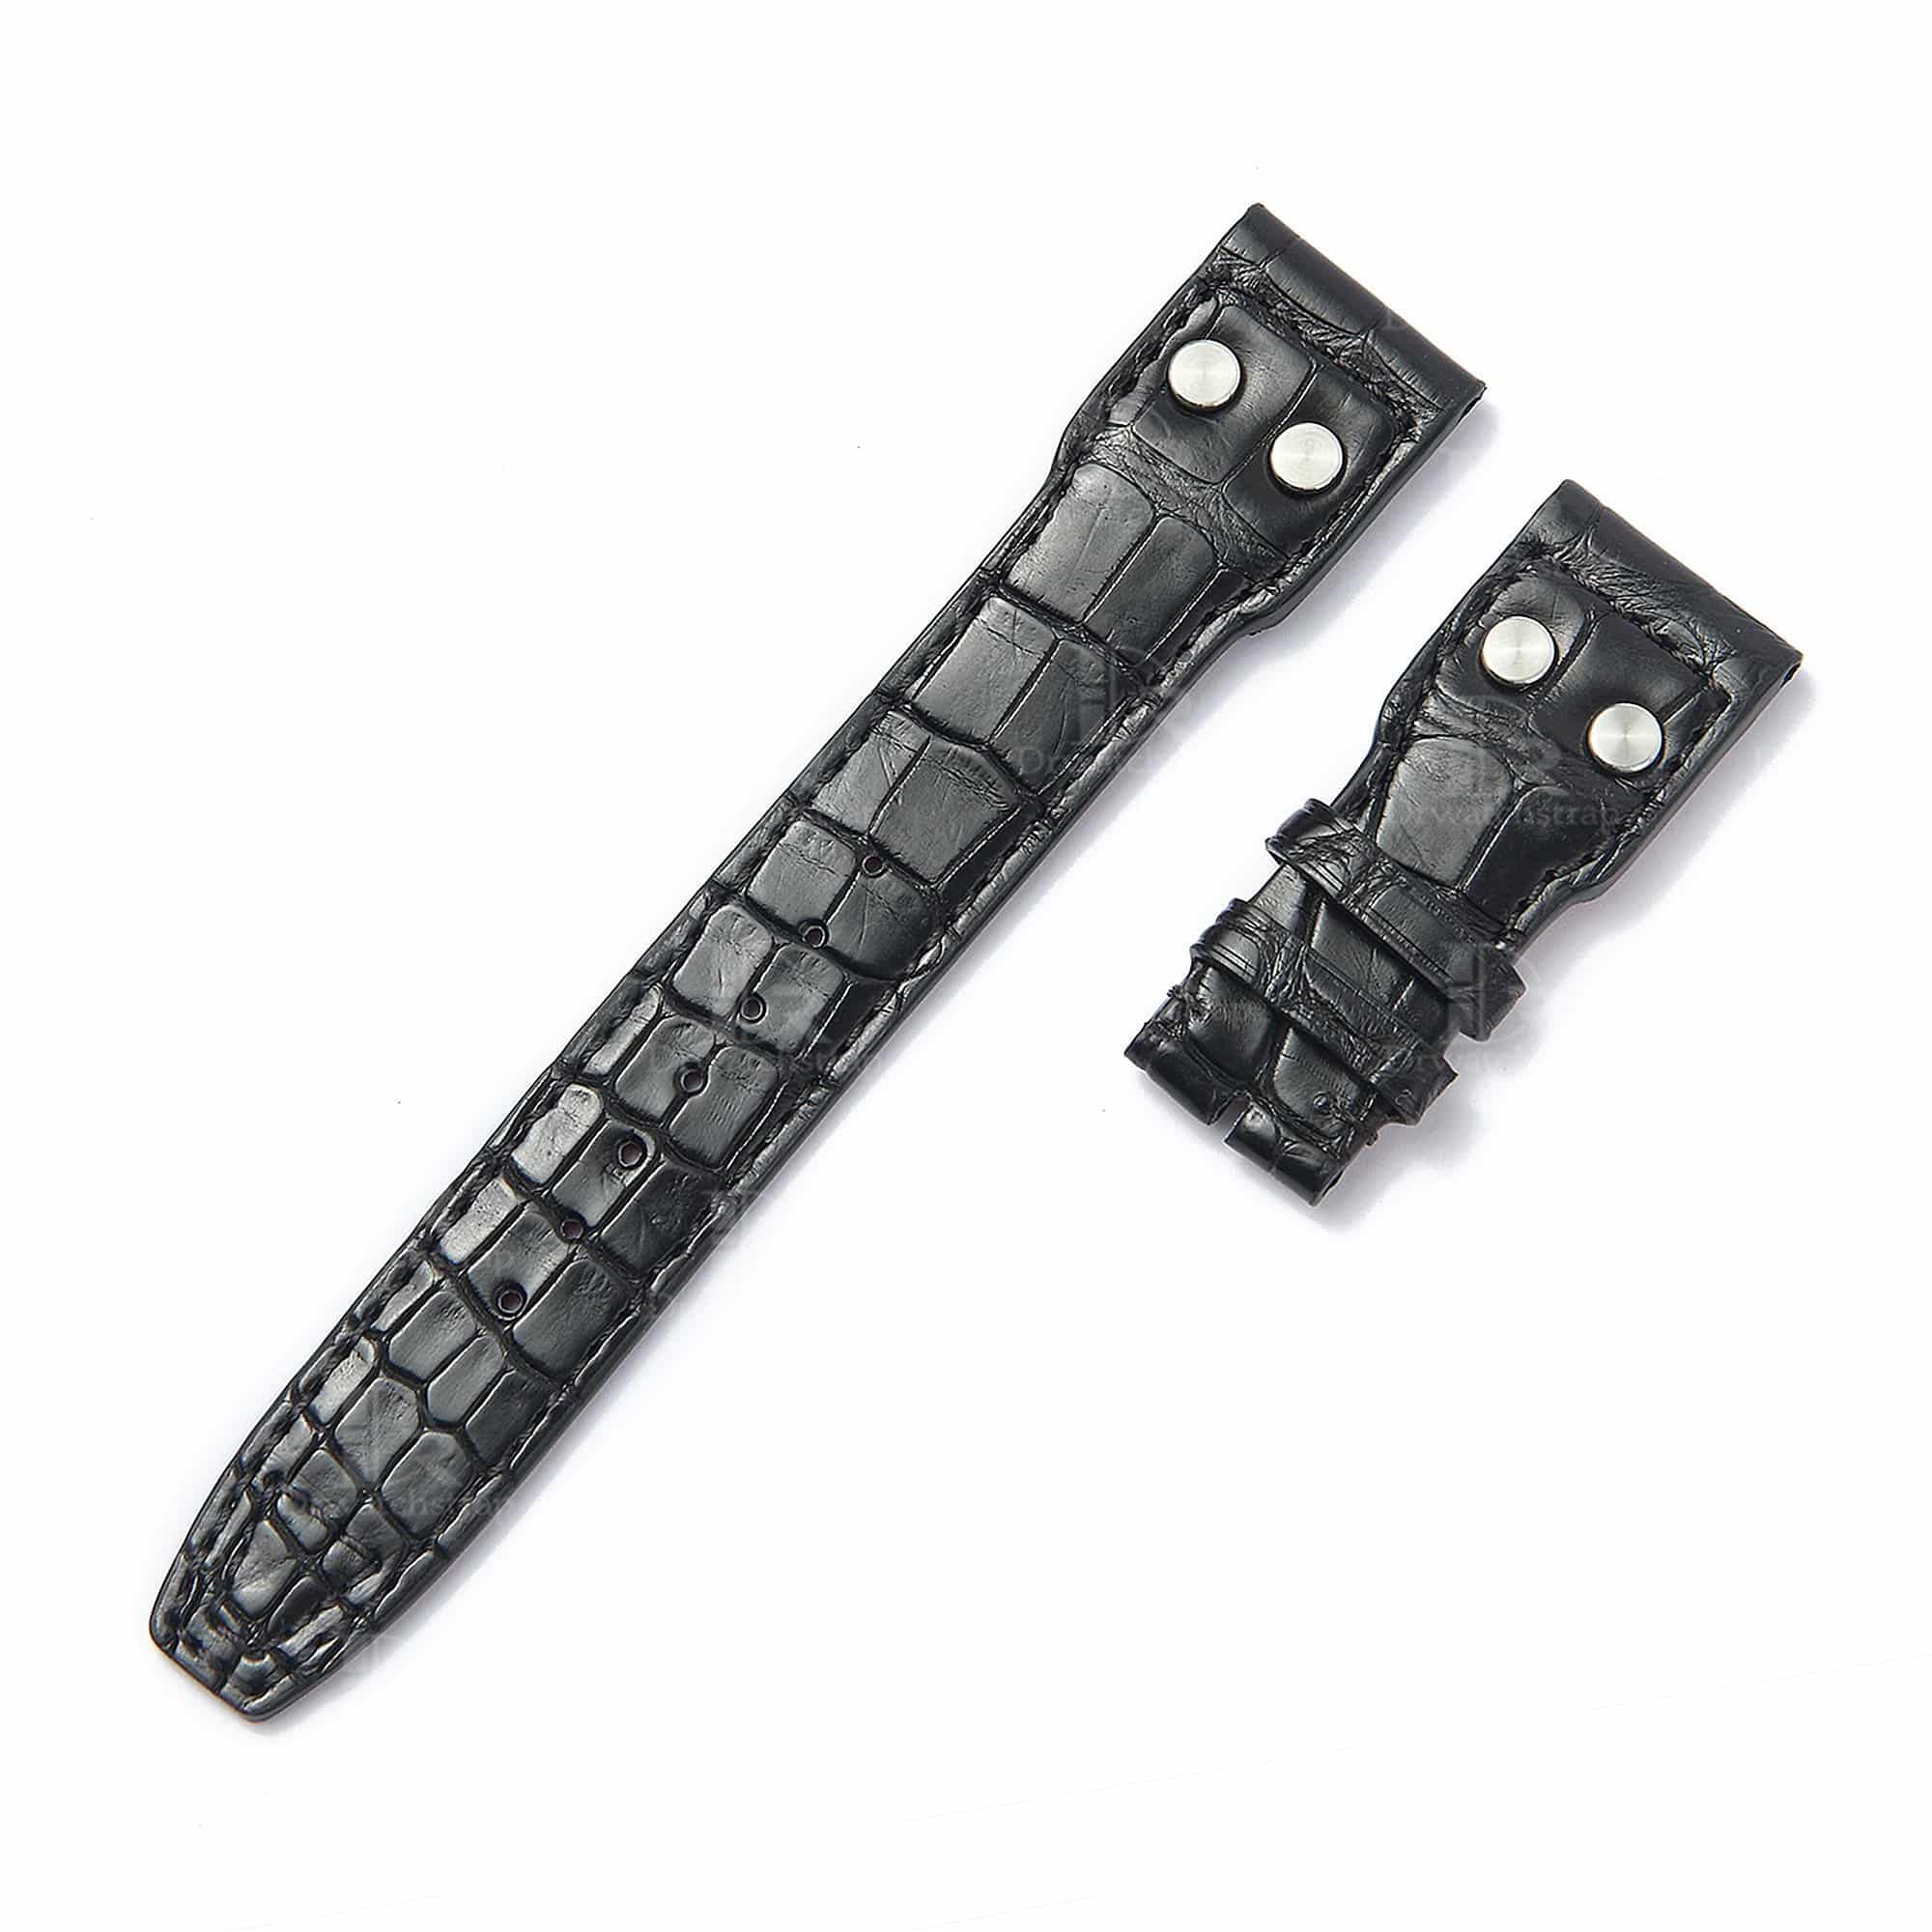 Custom OEM best quality American Alligator black Belly-scale leather replacement IWC Big Pilot watch strap and watch band online - Shop the high-end straps and watchbands at a low price 22mm with rivets